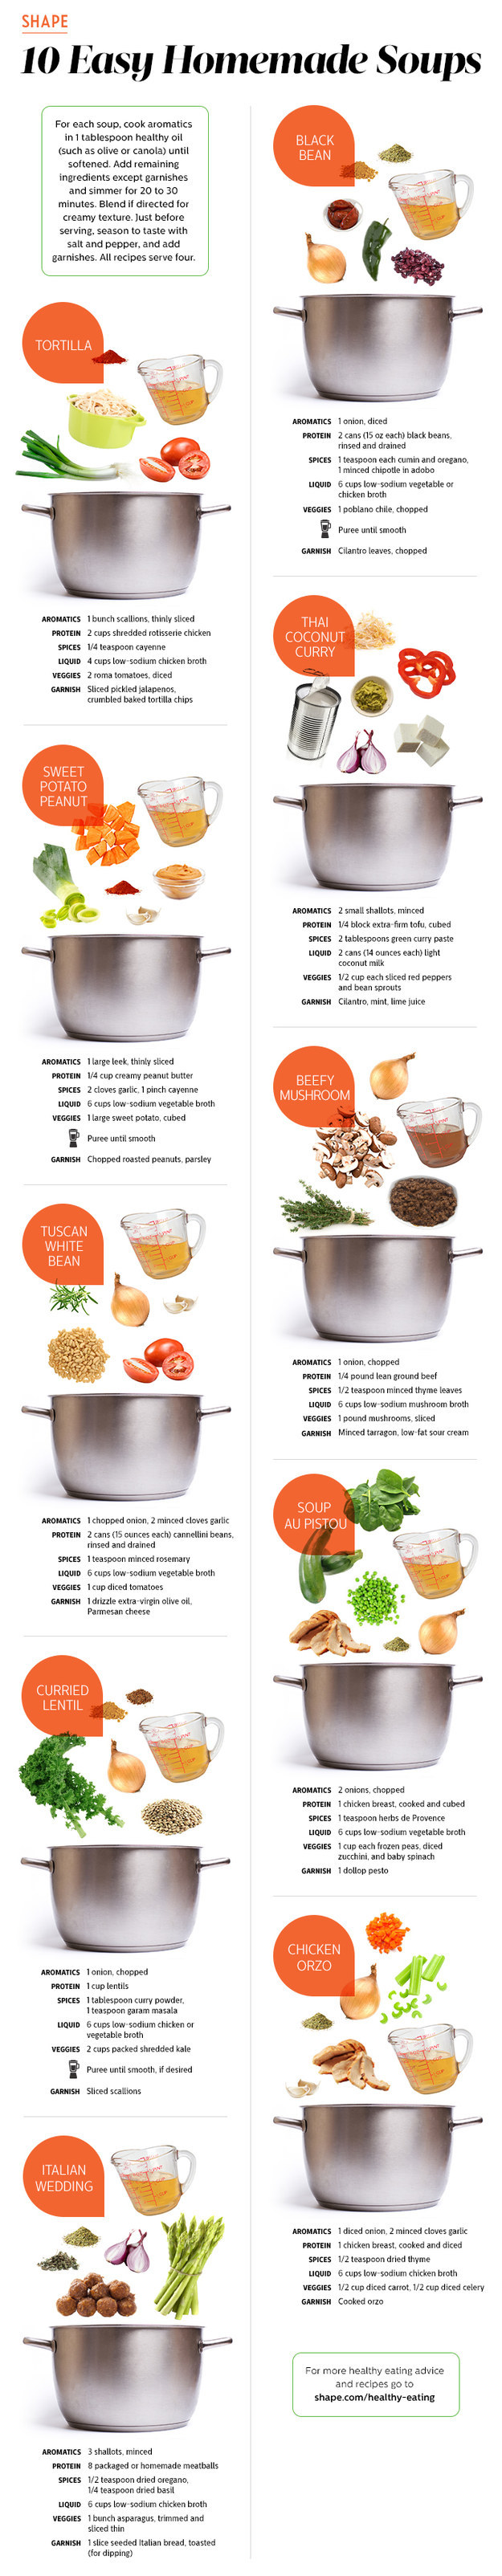 For making any soup from scratch